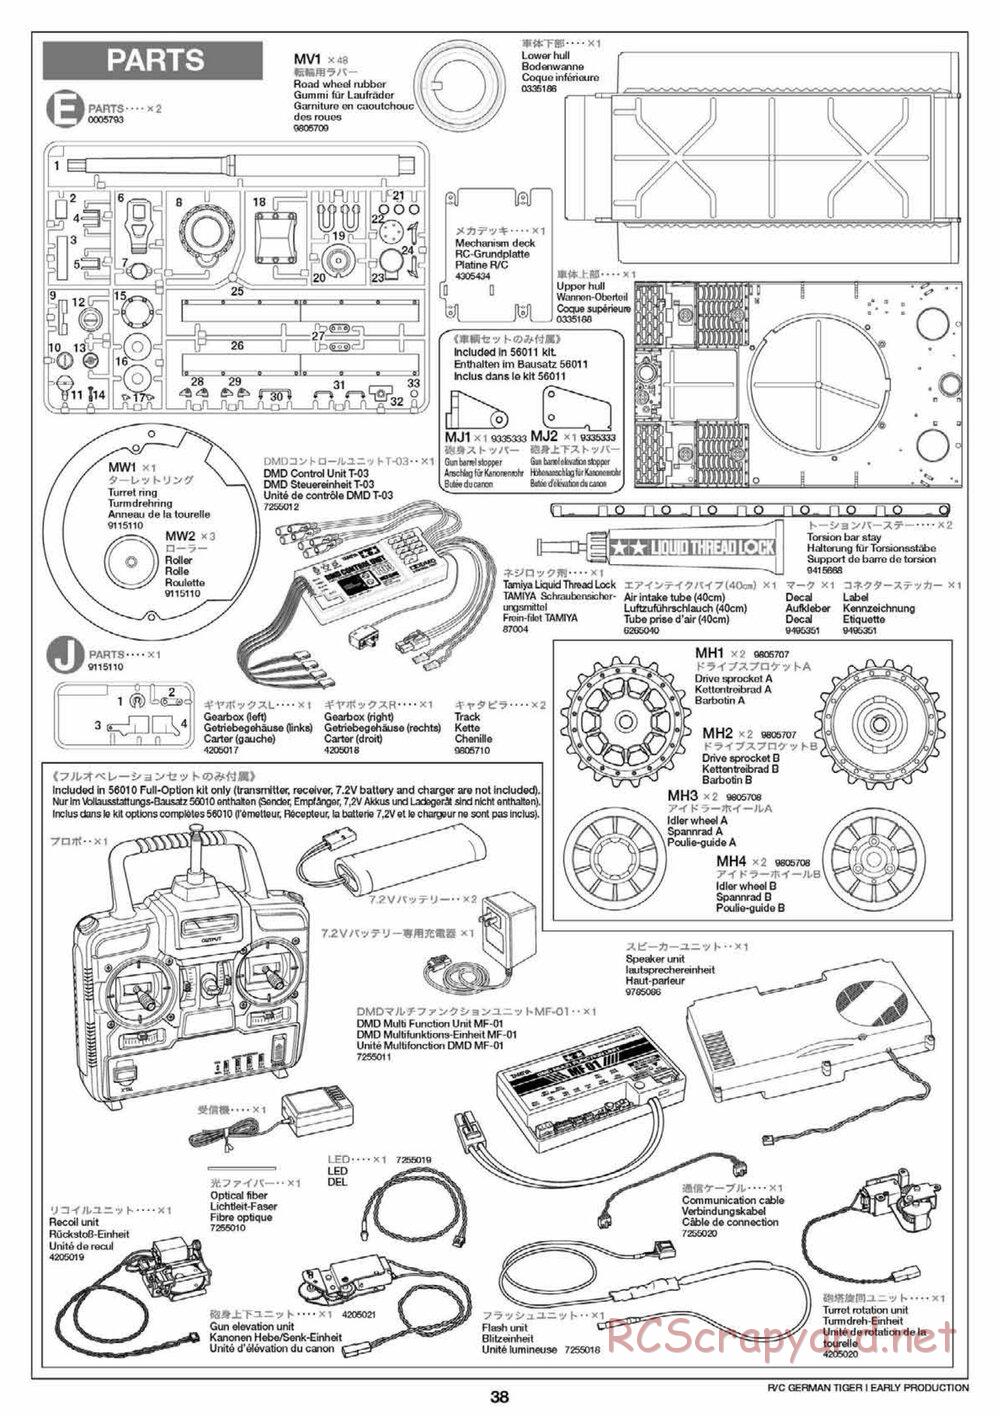 Tamiya - Tiger I Early Production - 1/16 Scale Chassis - Manual - Page 38